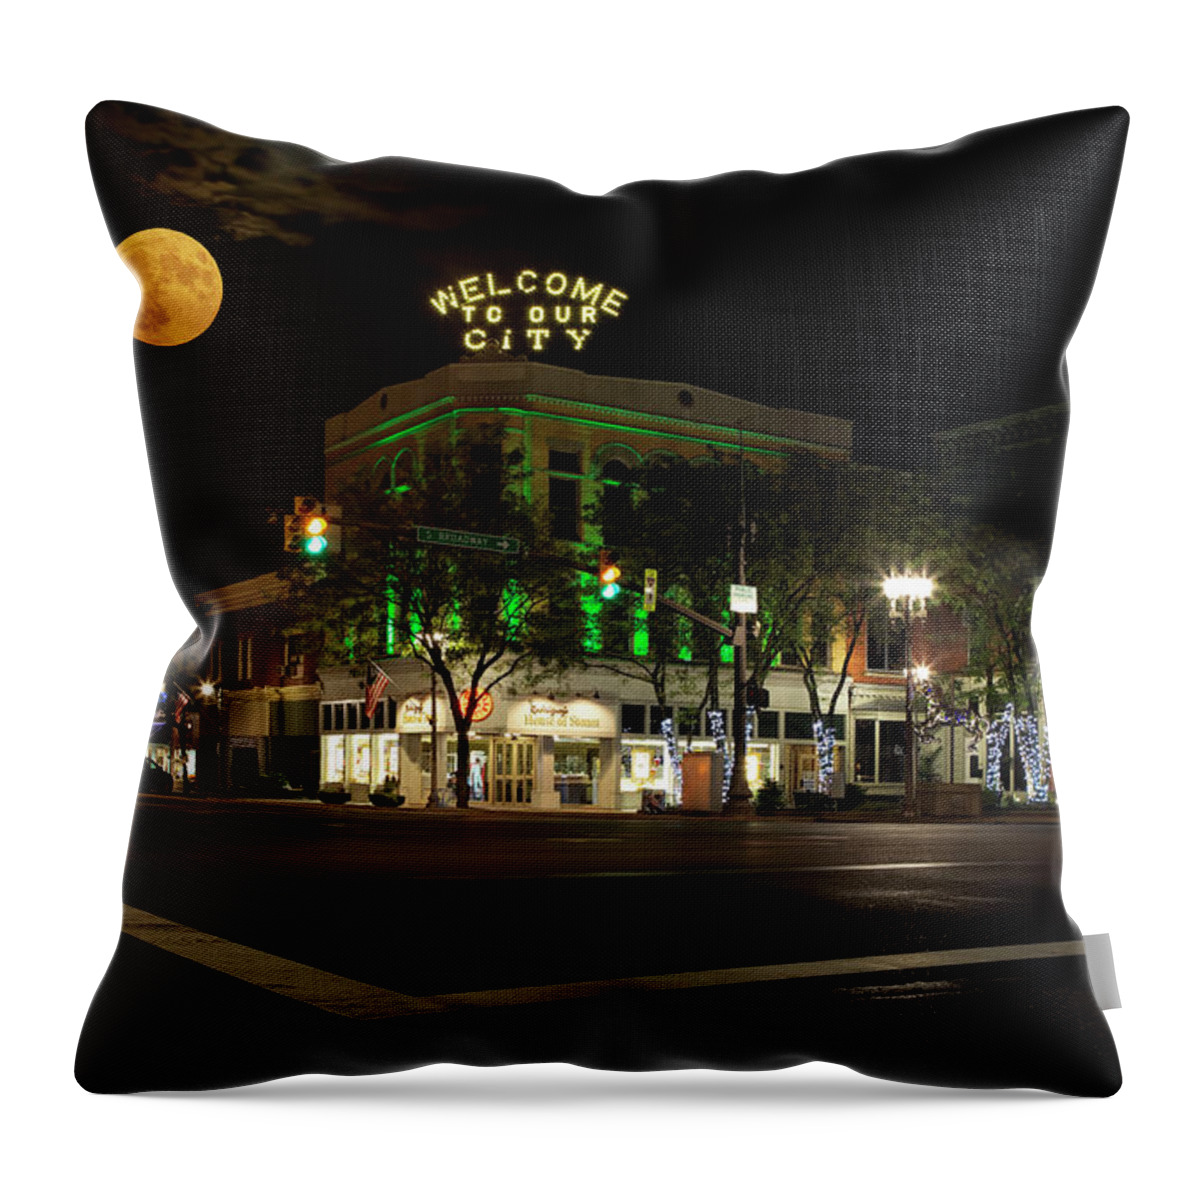 New Philadelphia Throw Pillow featuring the photograph Welcome To Our City by Deborah Penland